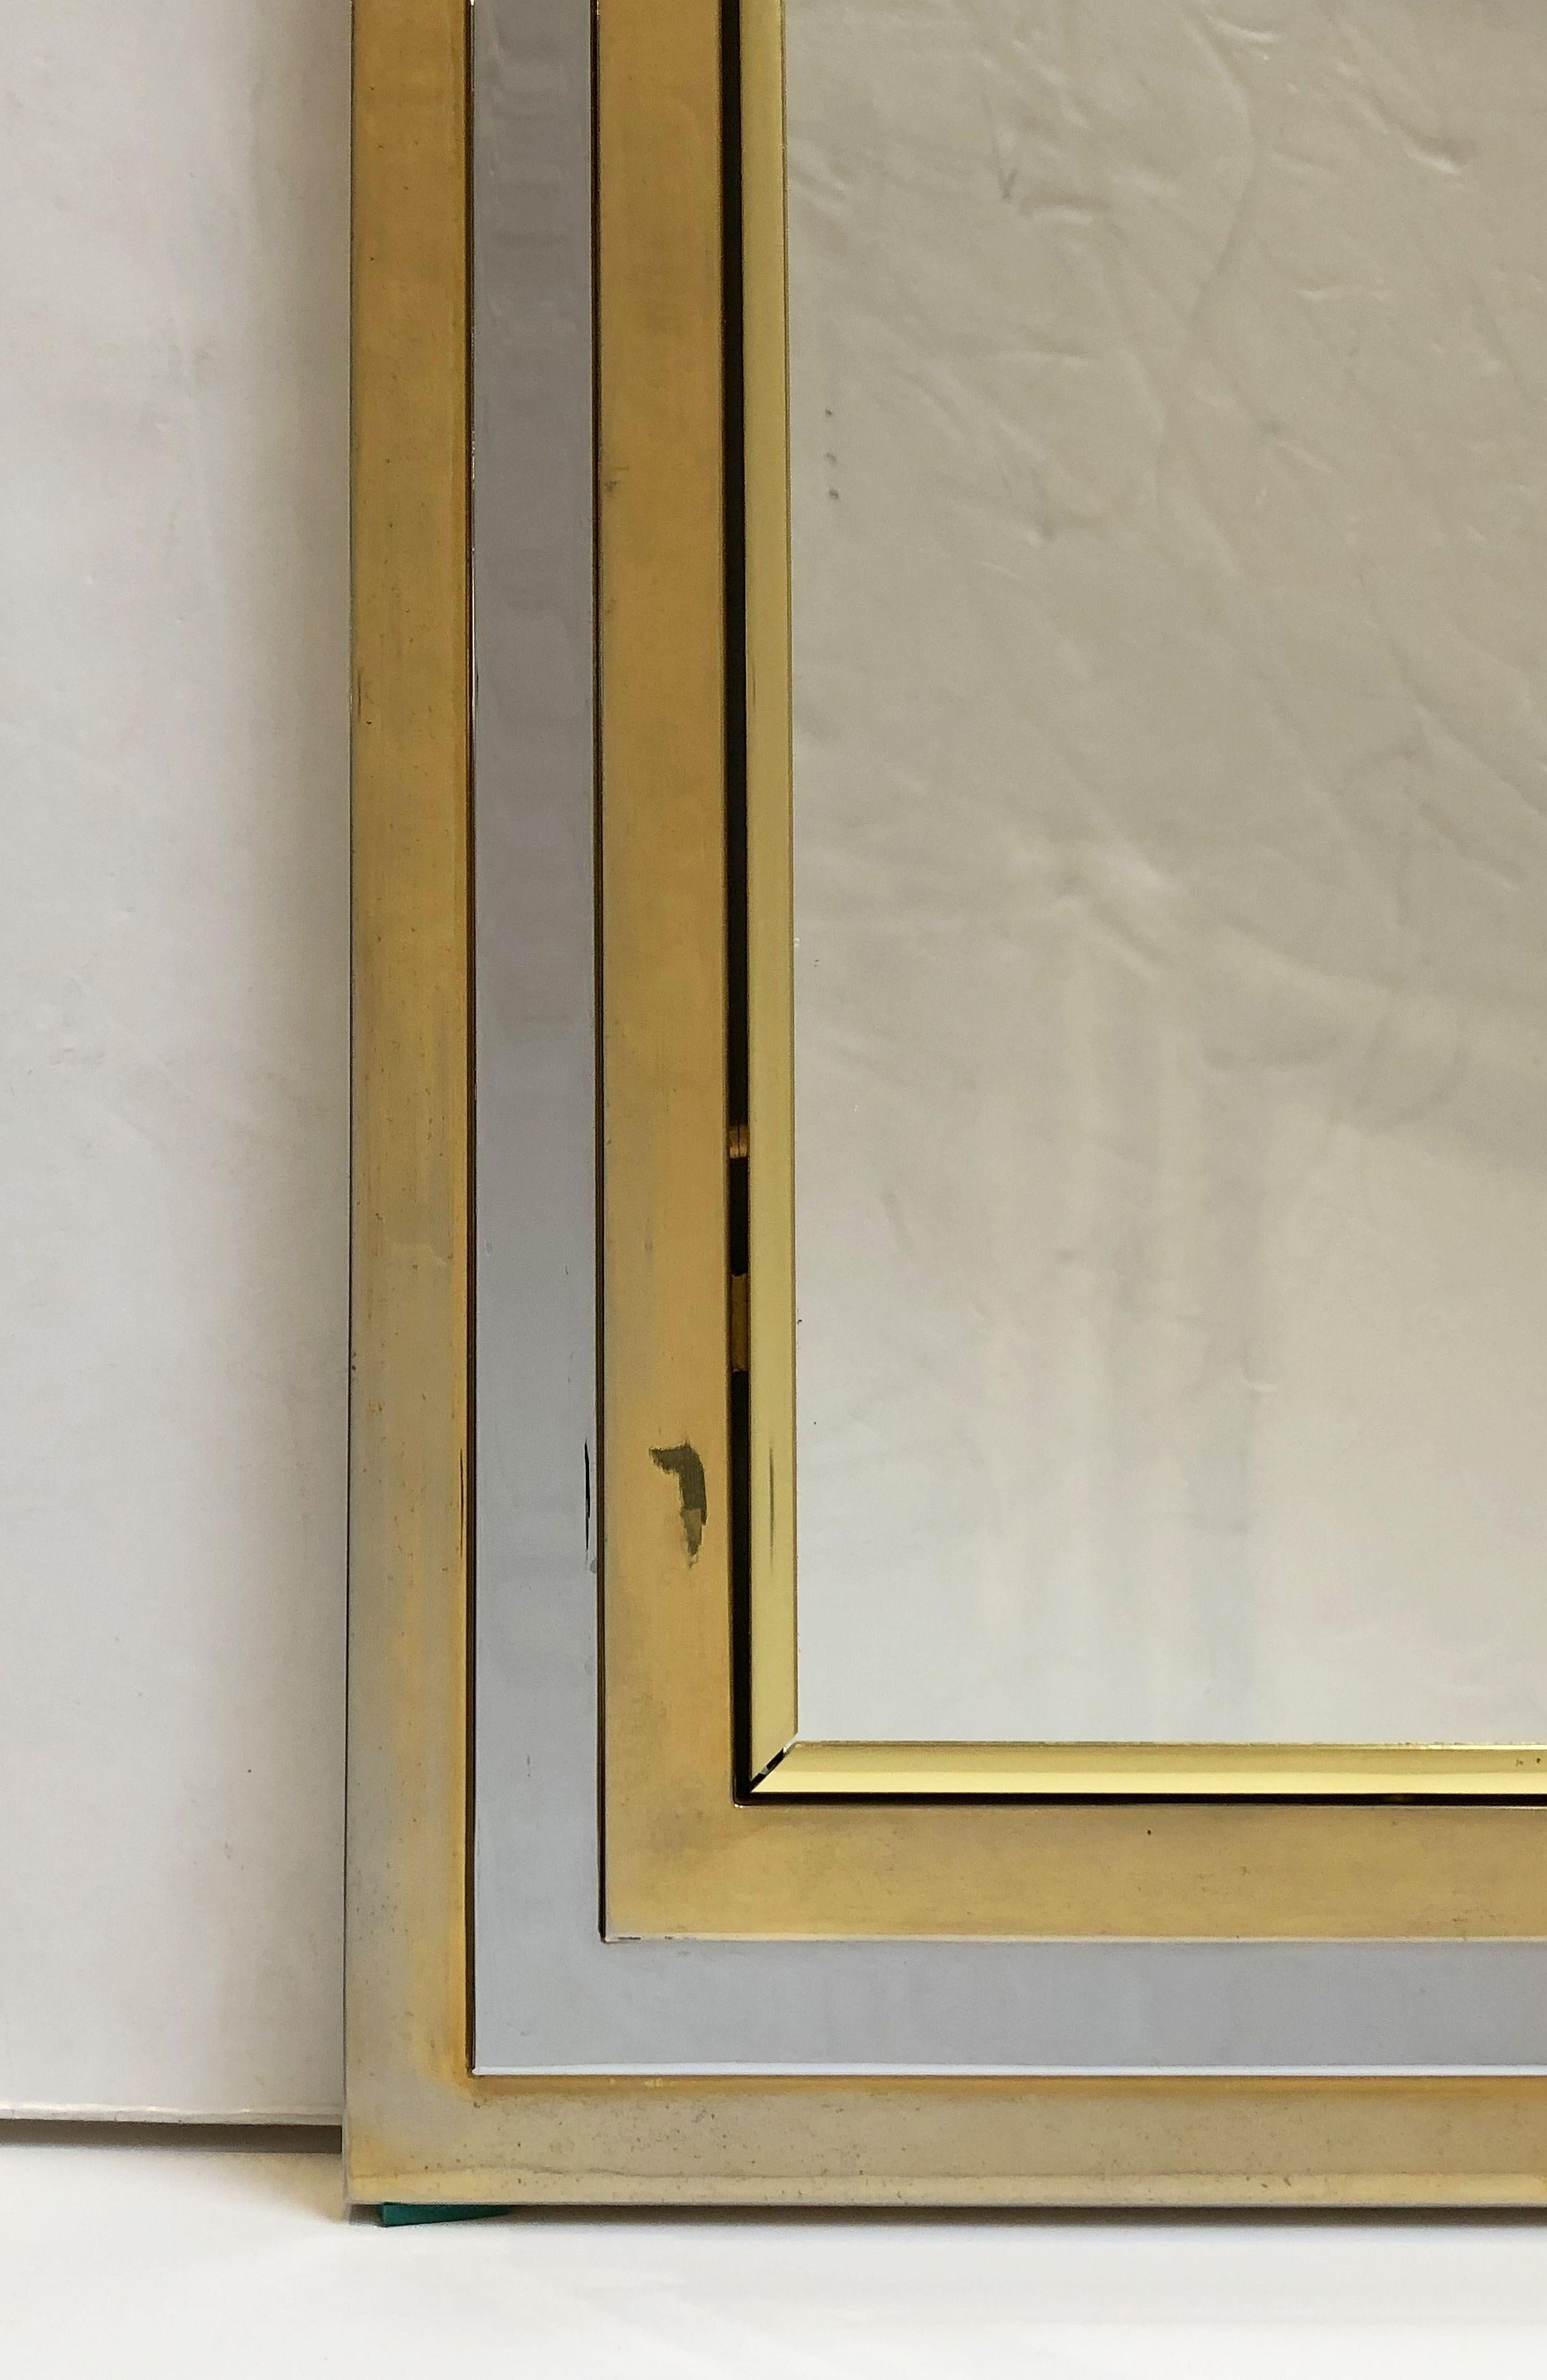 20th Century Art Deco Style Square Mirror of Brass and Chrome from England (Diameter 35 1/2)